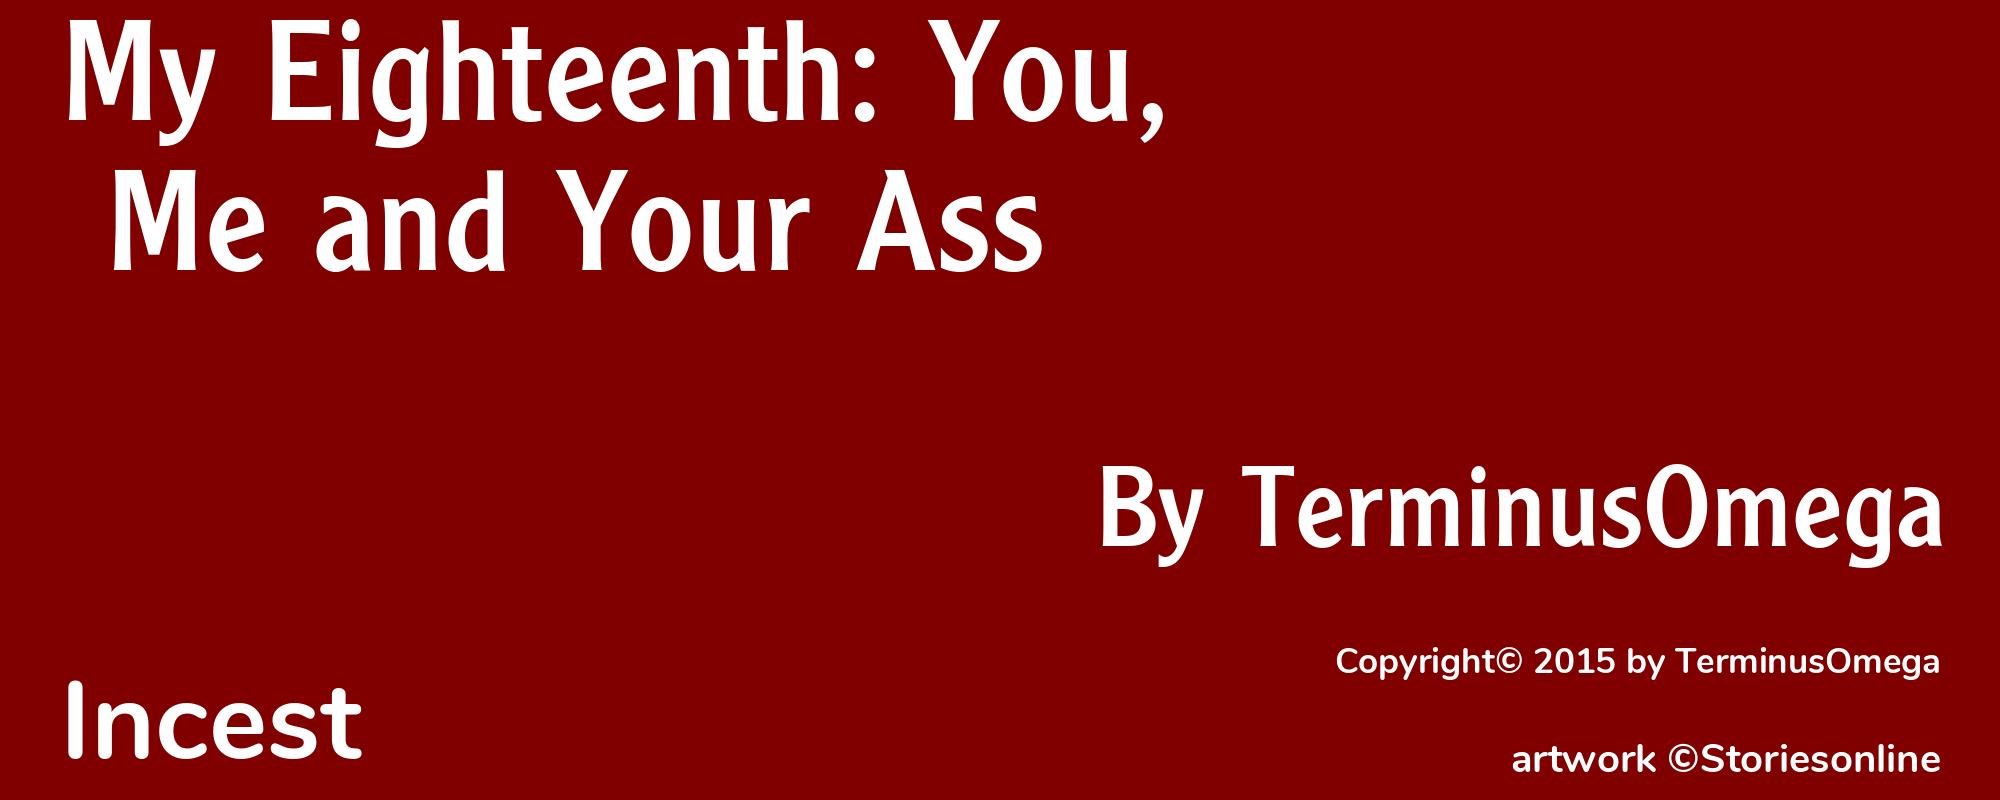 My Eighteenth: You, Me and Your Ass - Cover